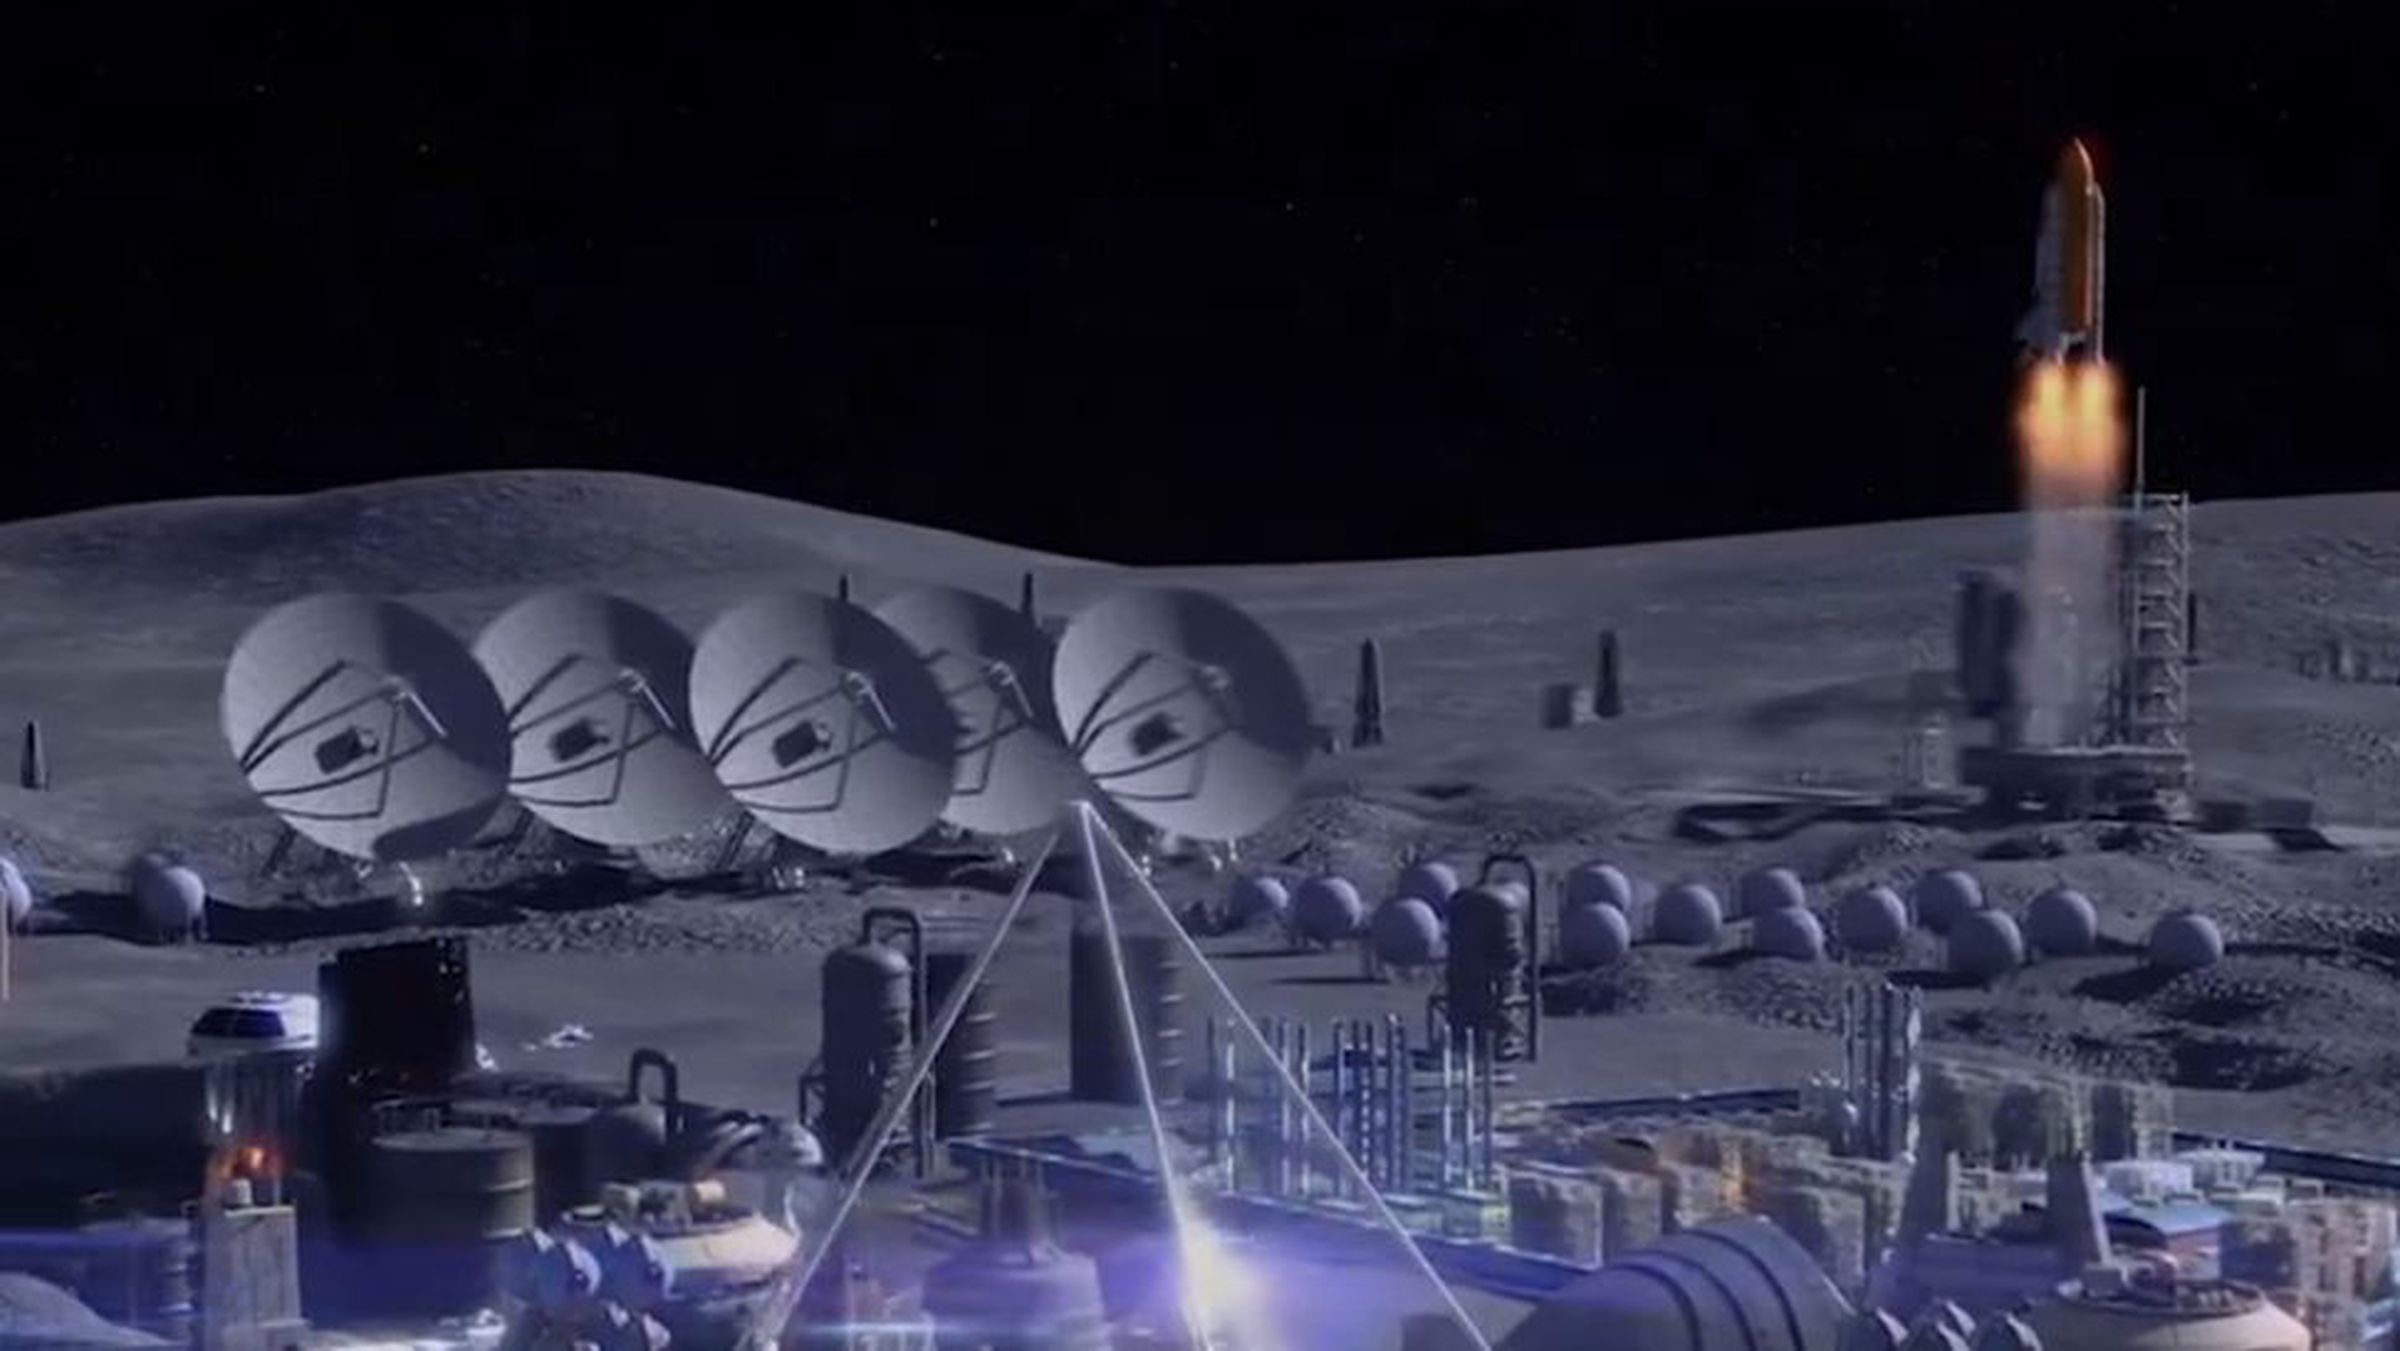 A screenshot of a moon base, with the US Space Shuttle lifting off in the background.